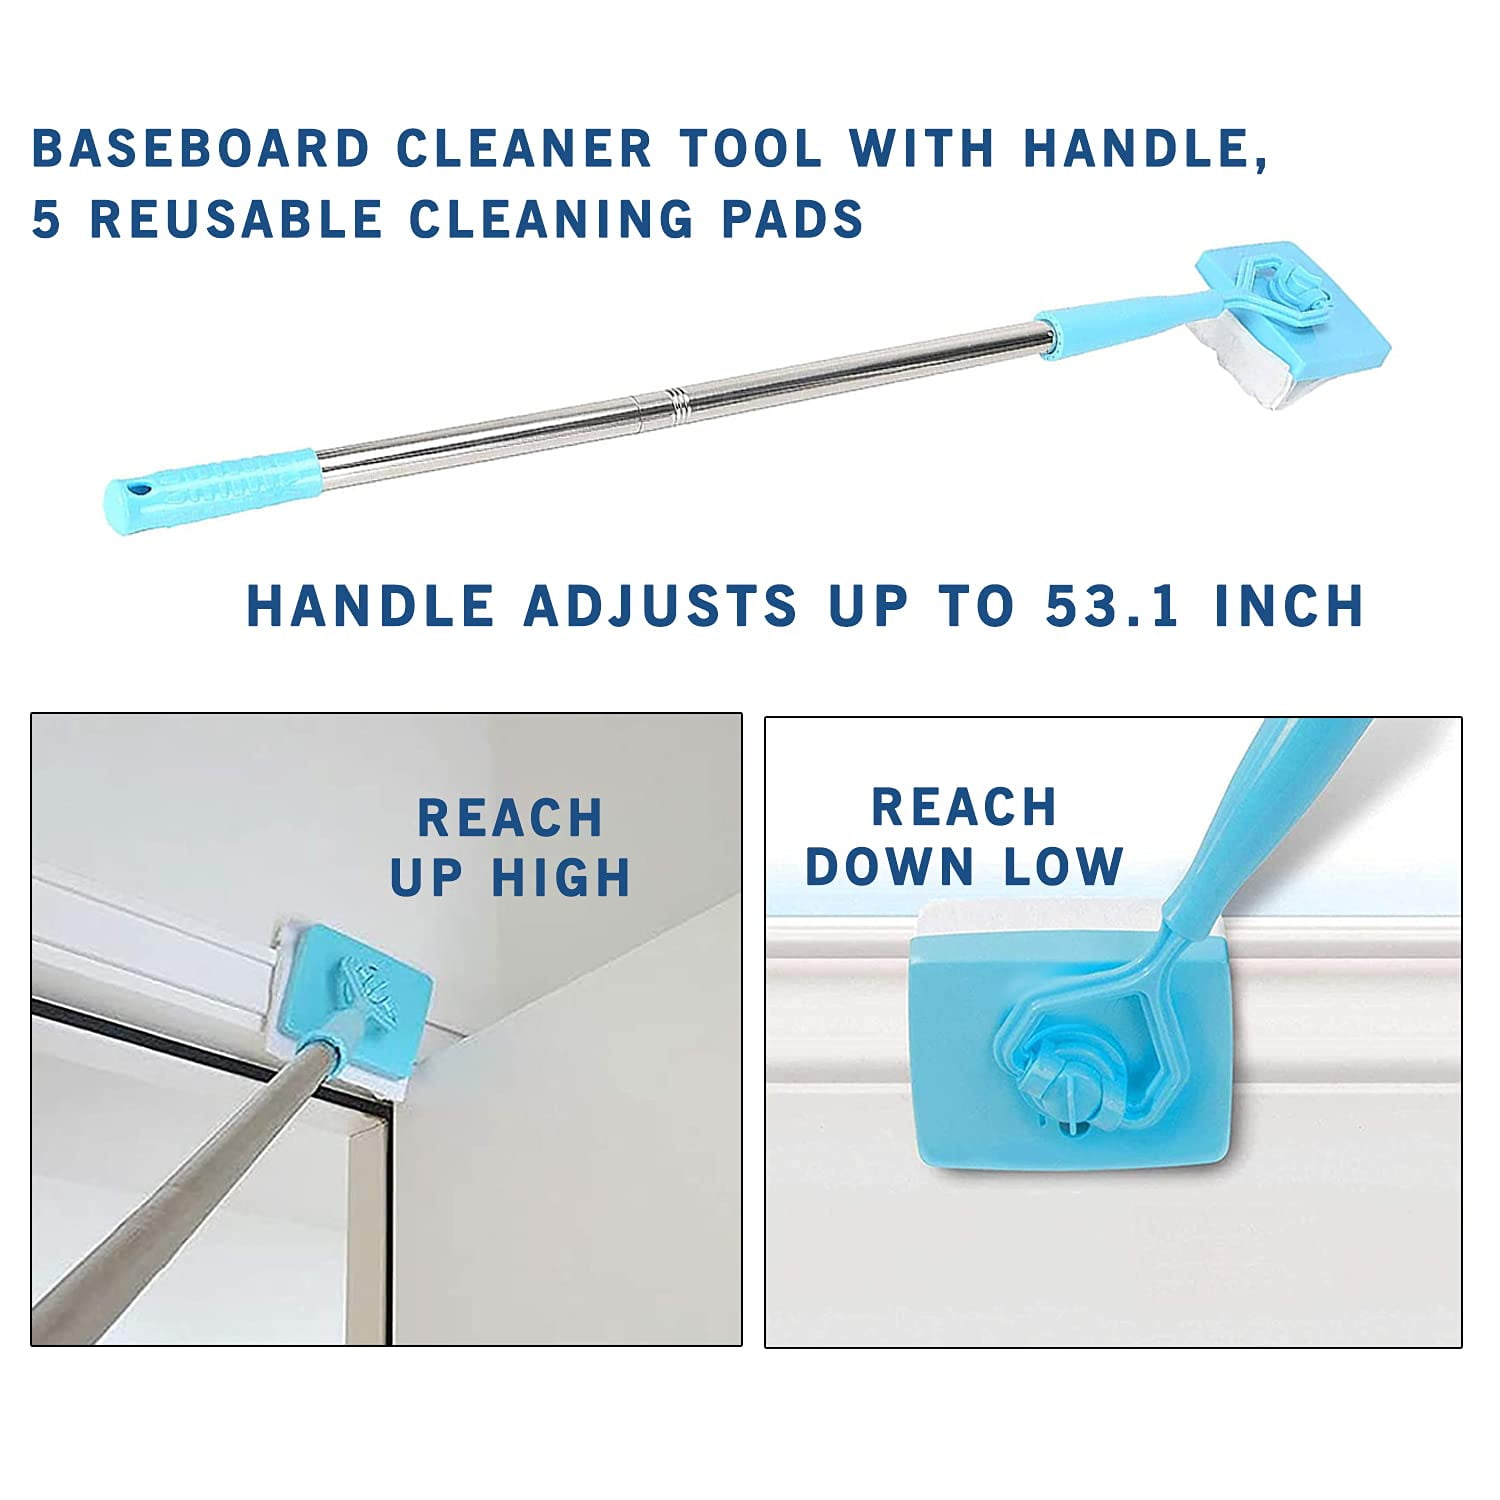 Baseboard Cleaner Tool with Handle, 5 Reusable Cleaning Pads, No